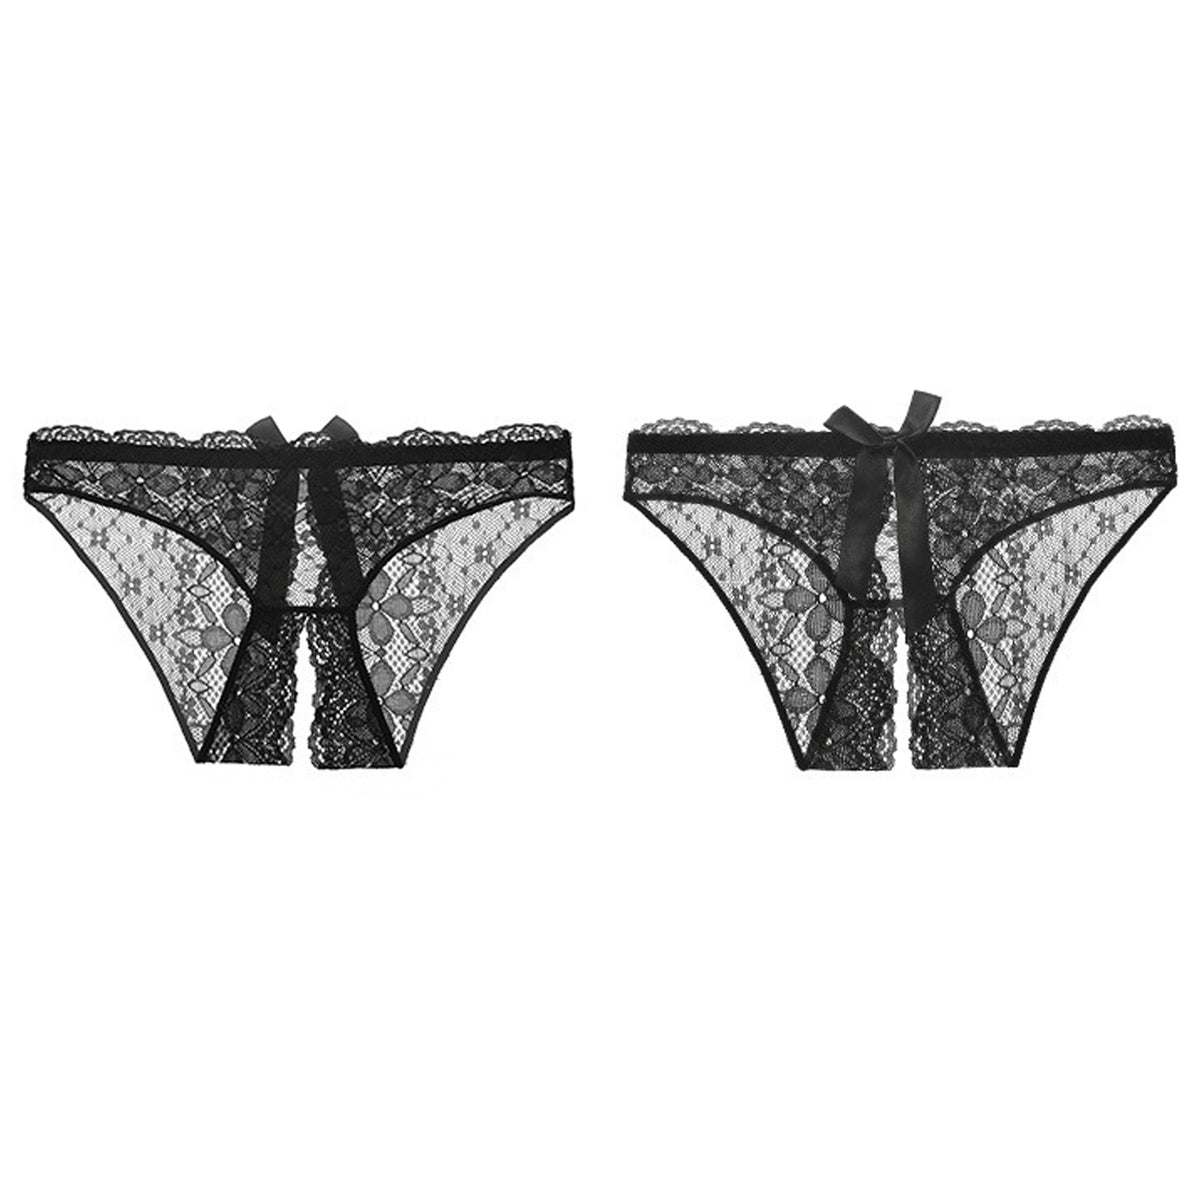 Yomorio Lace G-String Panty - Sexy and Comfortable Lingerie